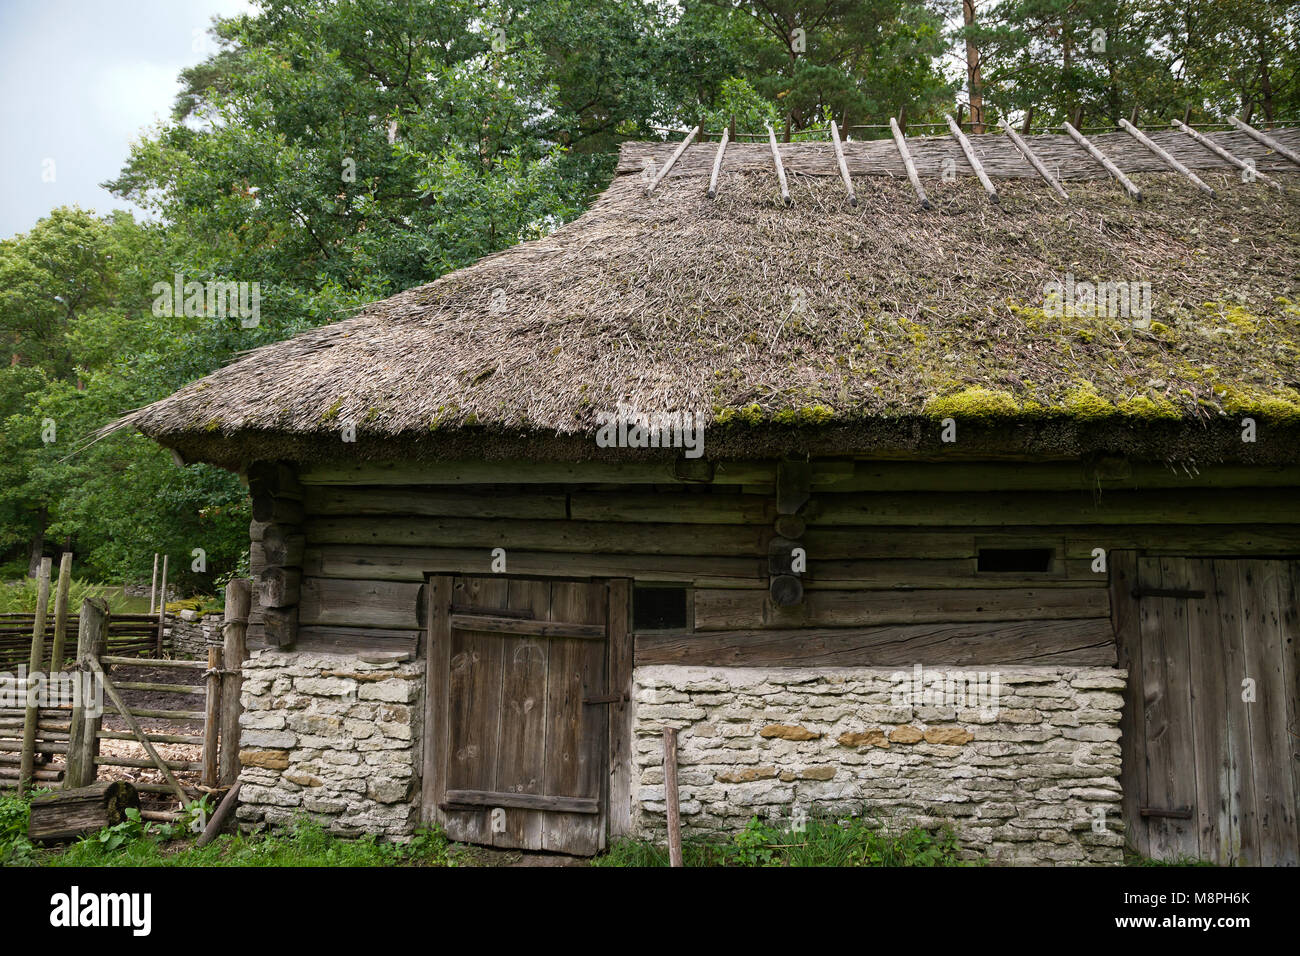 Thatched house at Rocca al Mare open air museum, Tallinn, Estonia Stock Photo